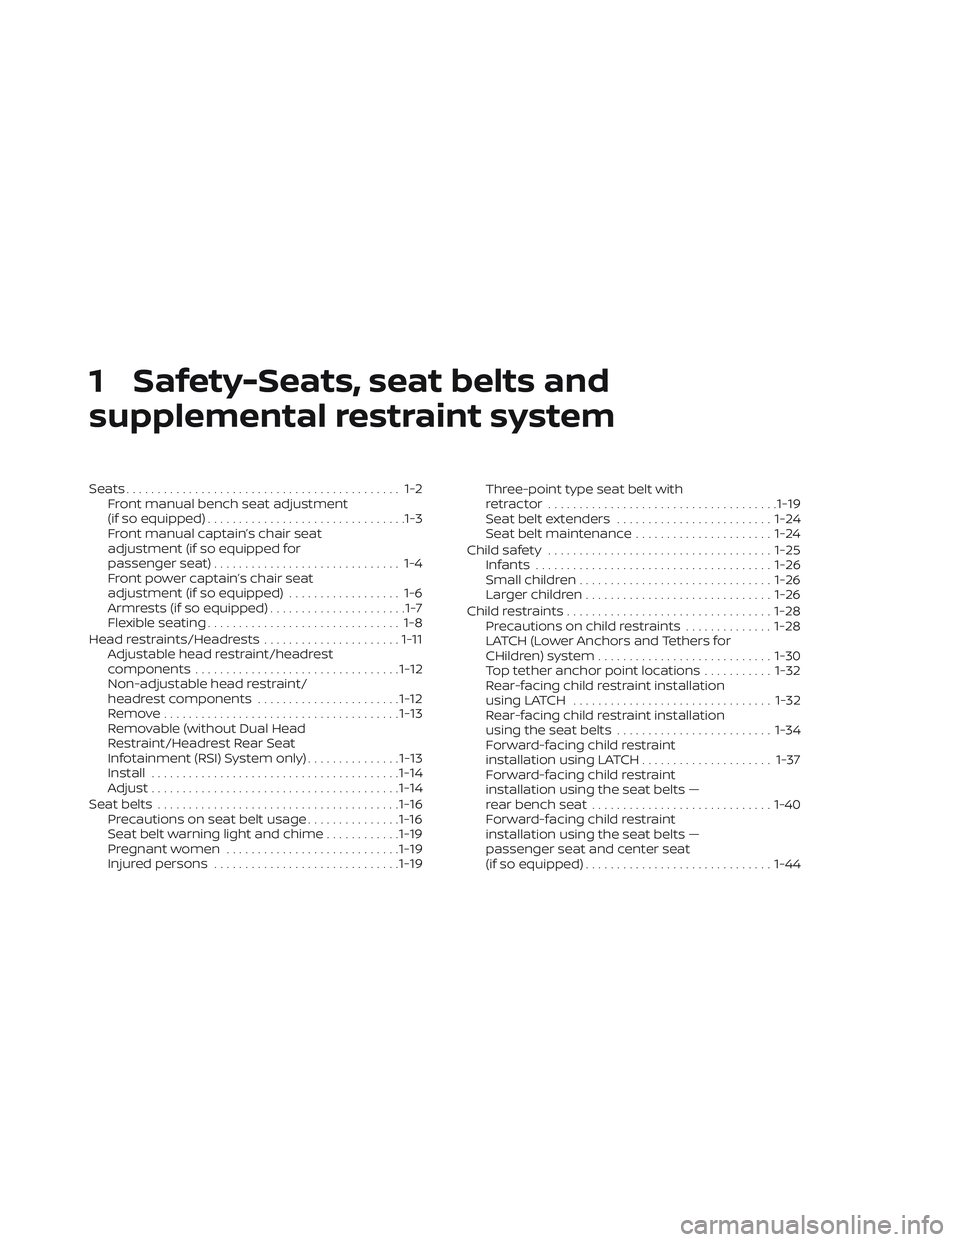 NISSAN TITAN 2022  Owners Manual 1 Safety-Seats, seat belts and
supplemental restraint system
Seats............................................ 1-2Front manual bench seat adjustment
(if so equipped) ................................1-